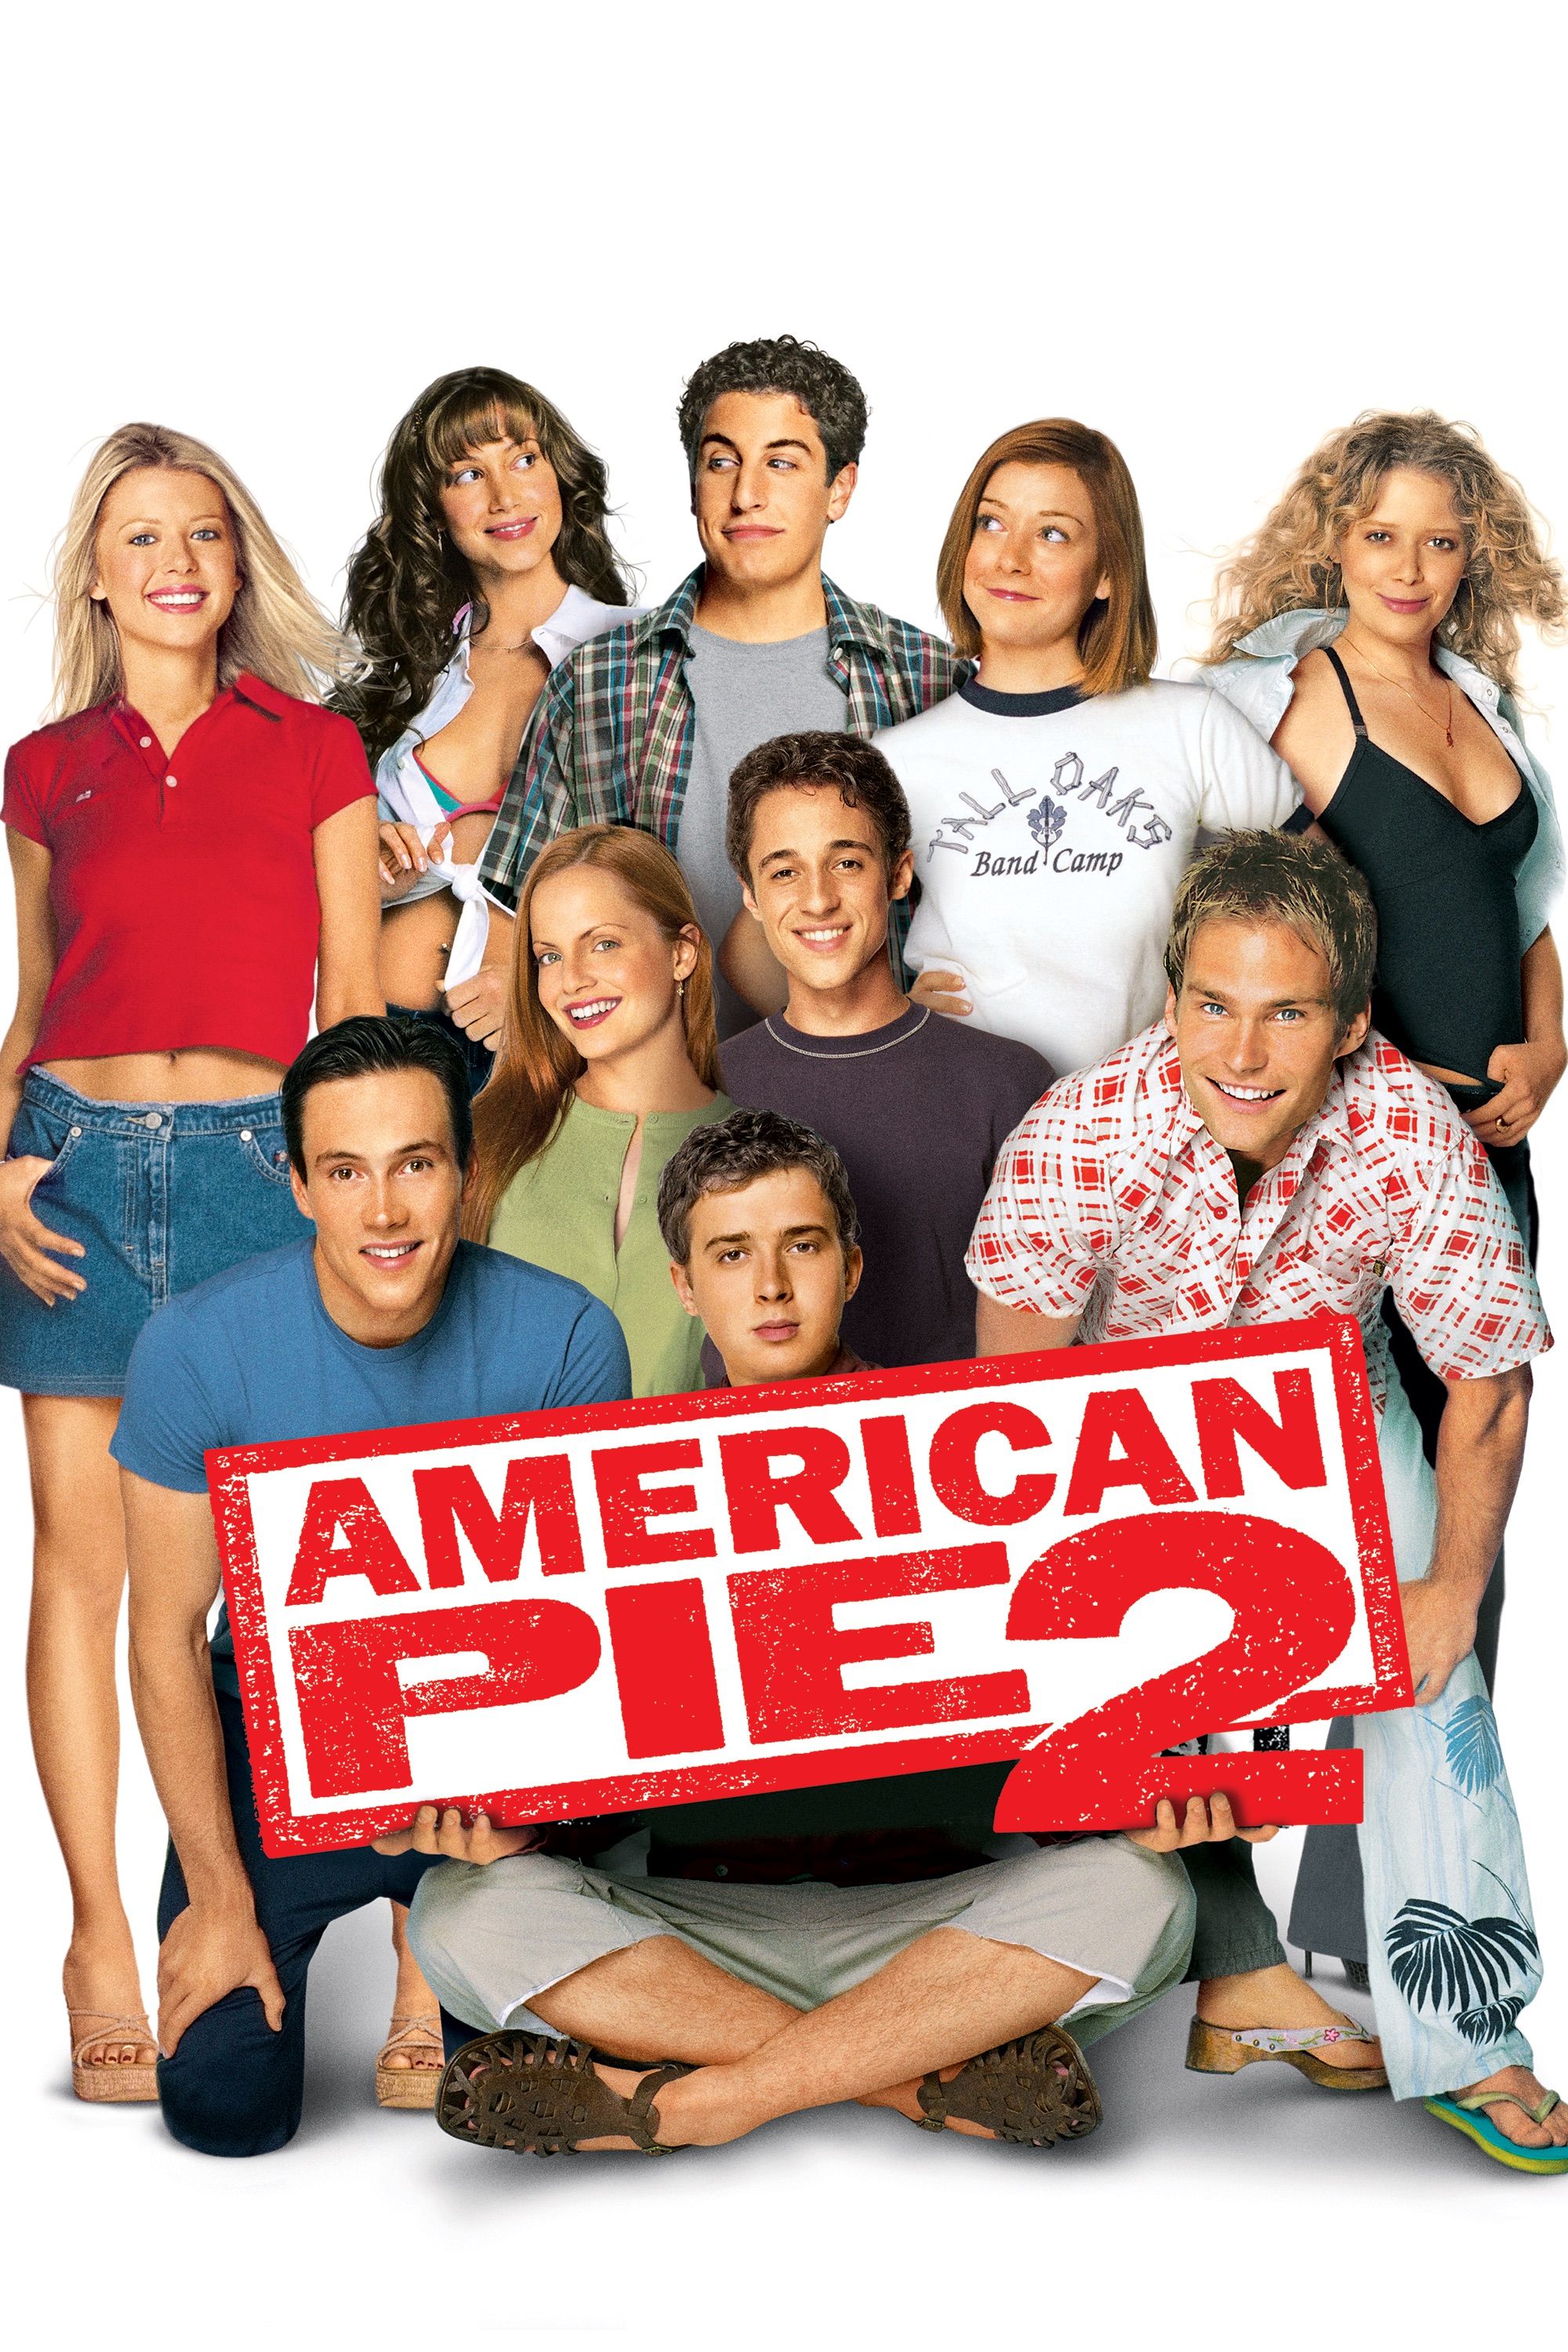 angela hinchliffe recommends Watch American Pie 2online